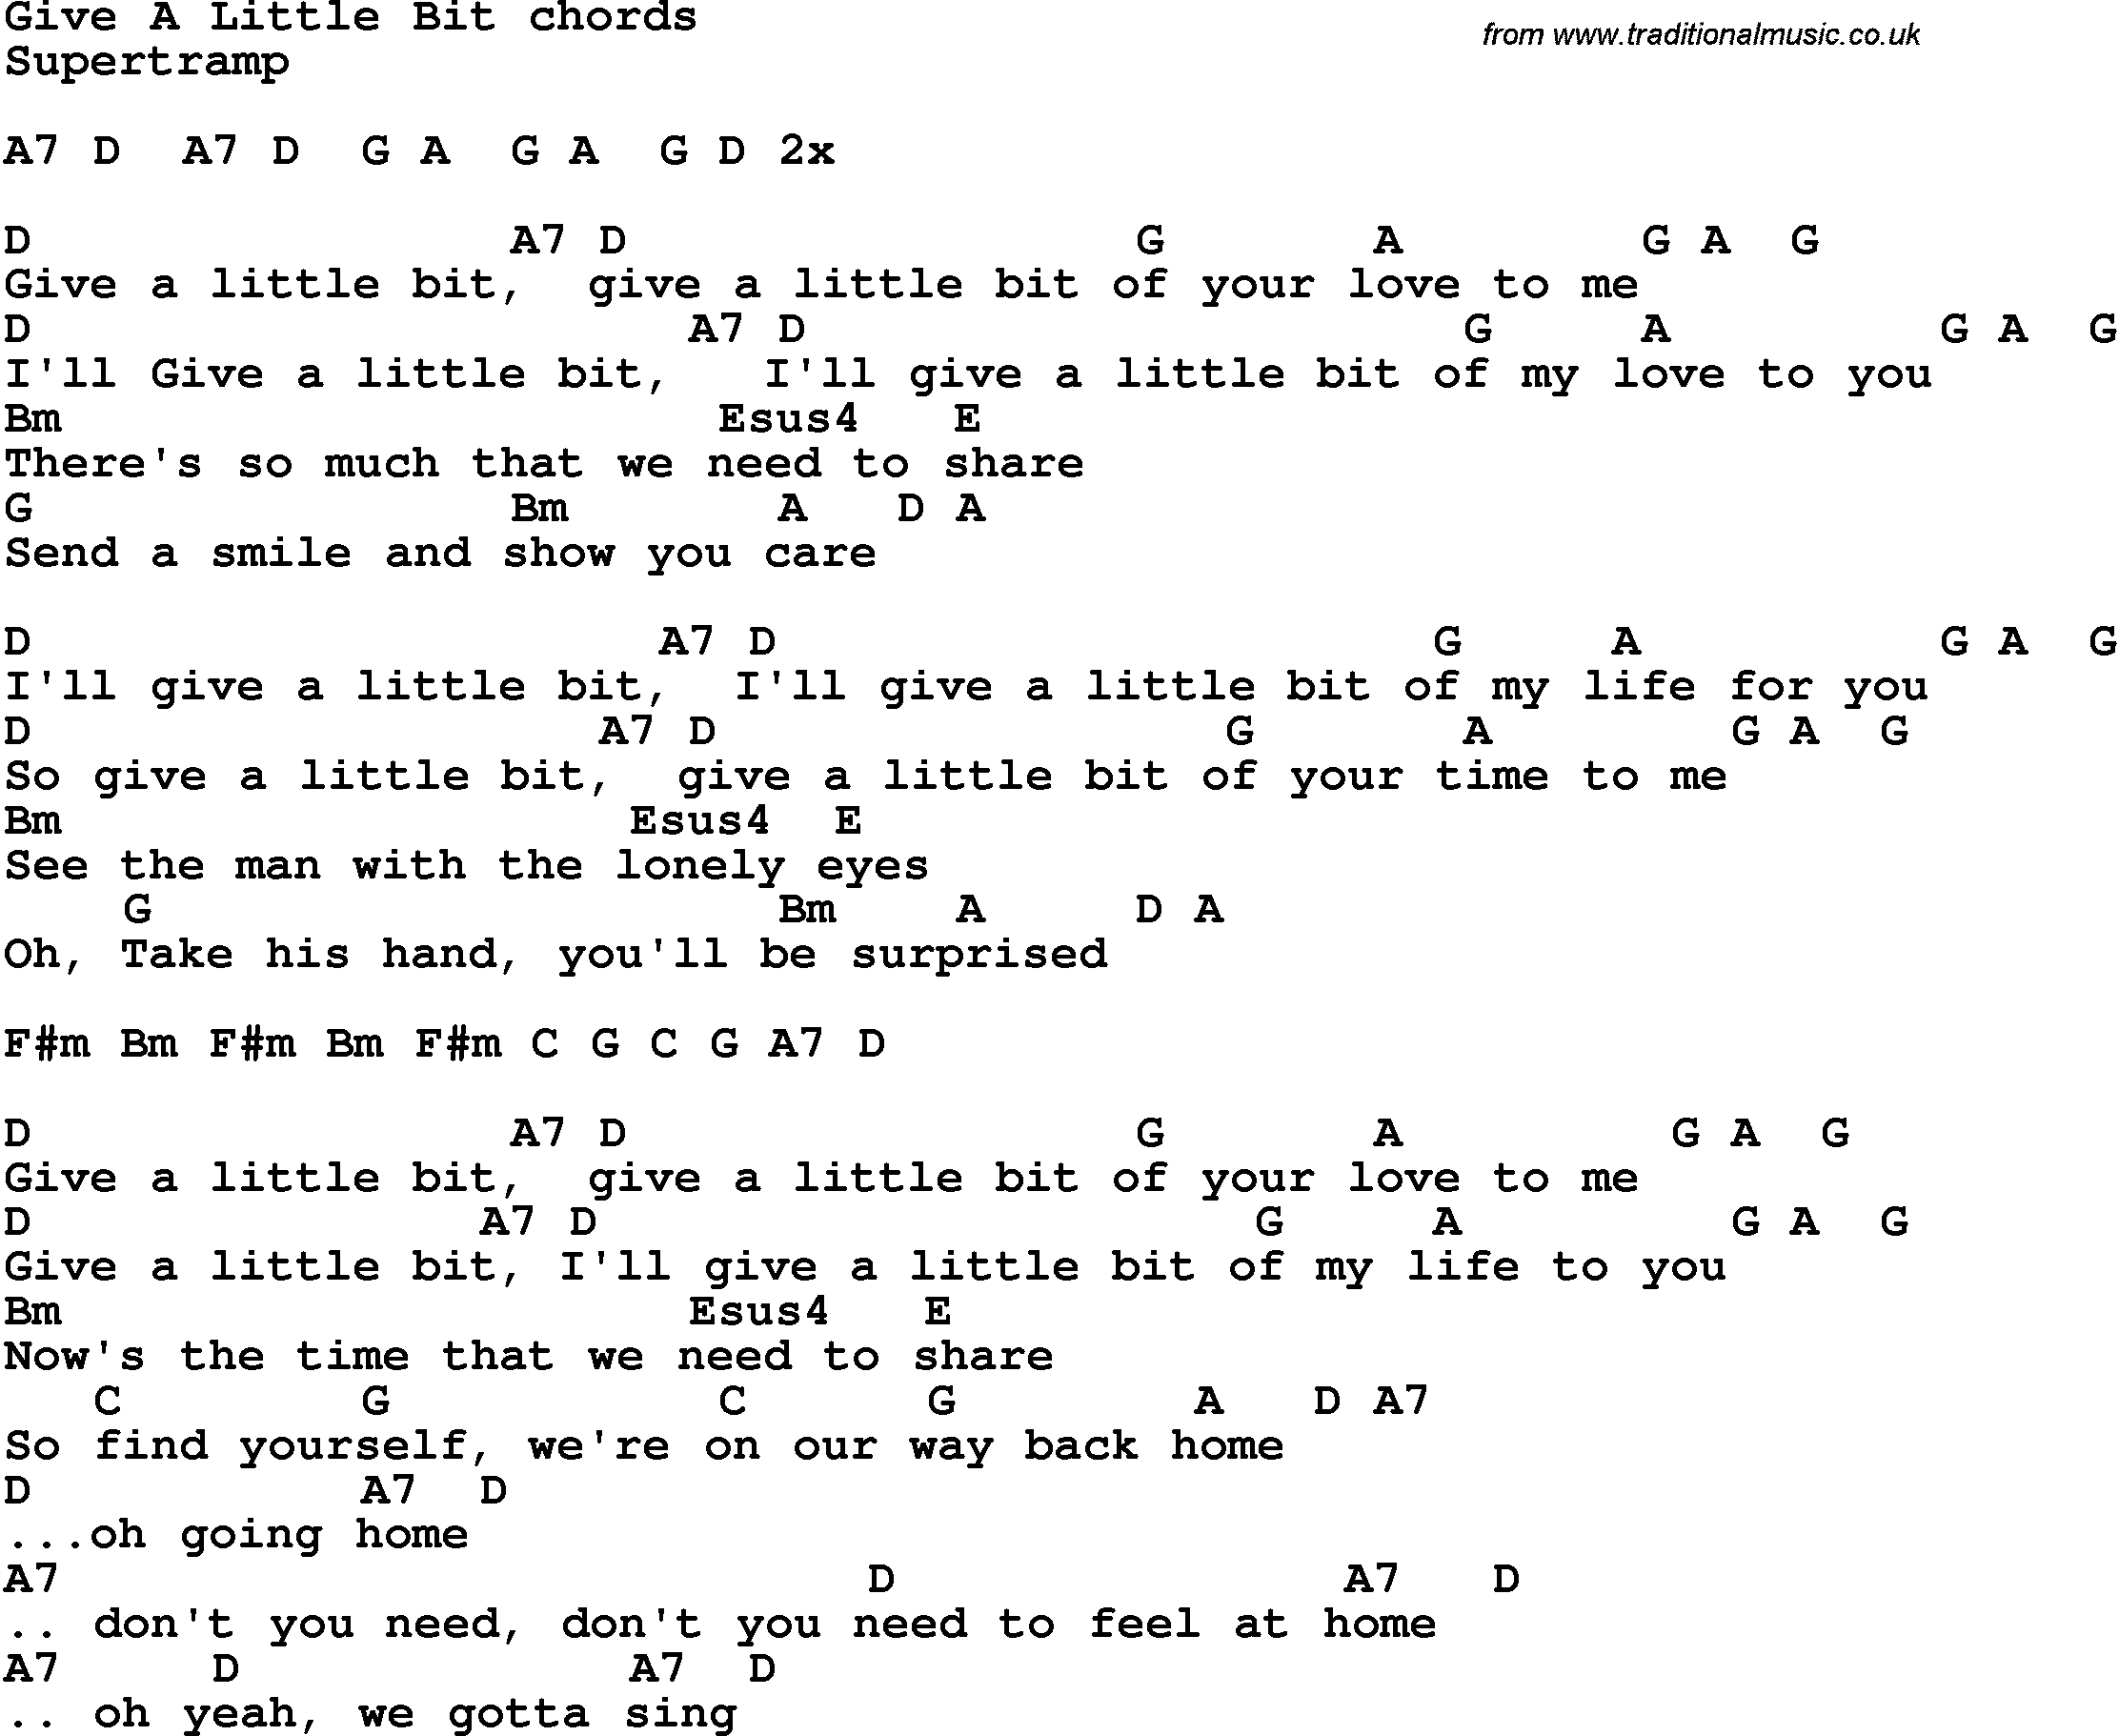 Song Lyrics with guitar chords for Give A Little Bit